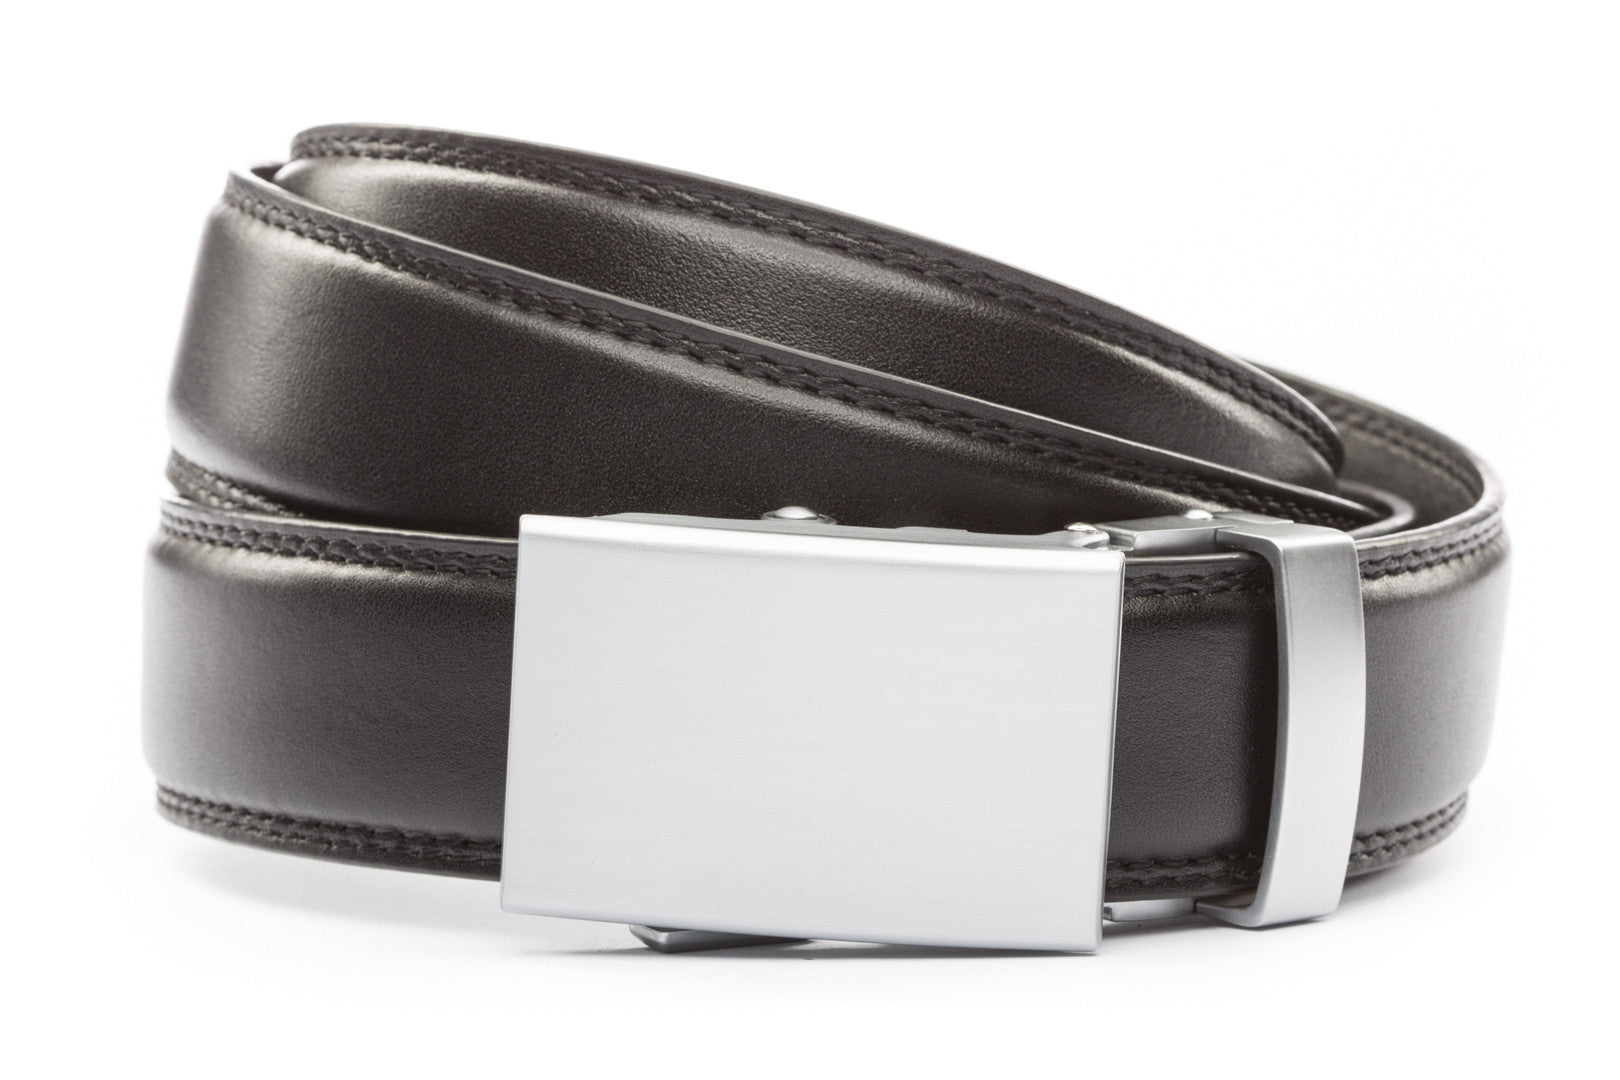 Black Formal Leather w/Classic in Silver Buckle (1.25") - Anson Belt & Buckle